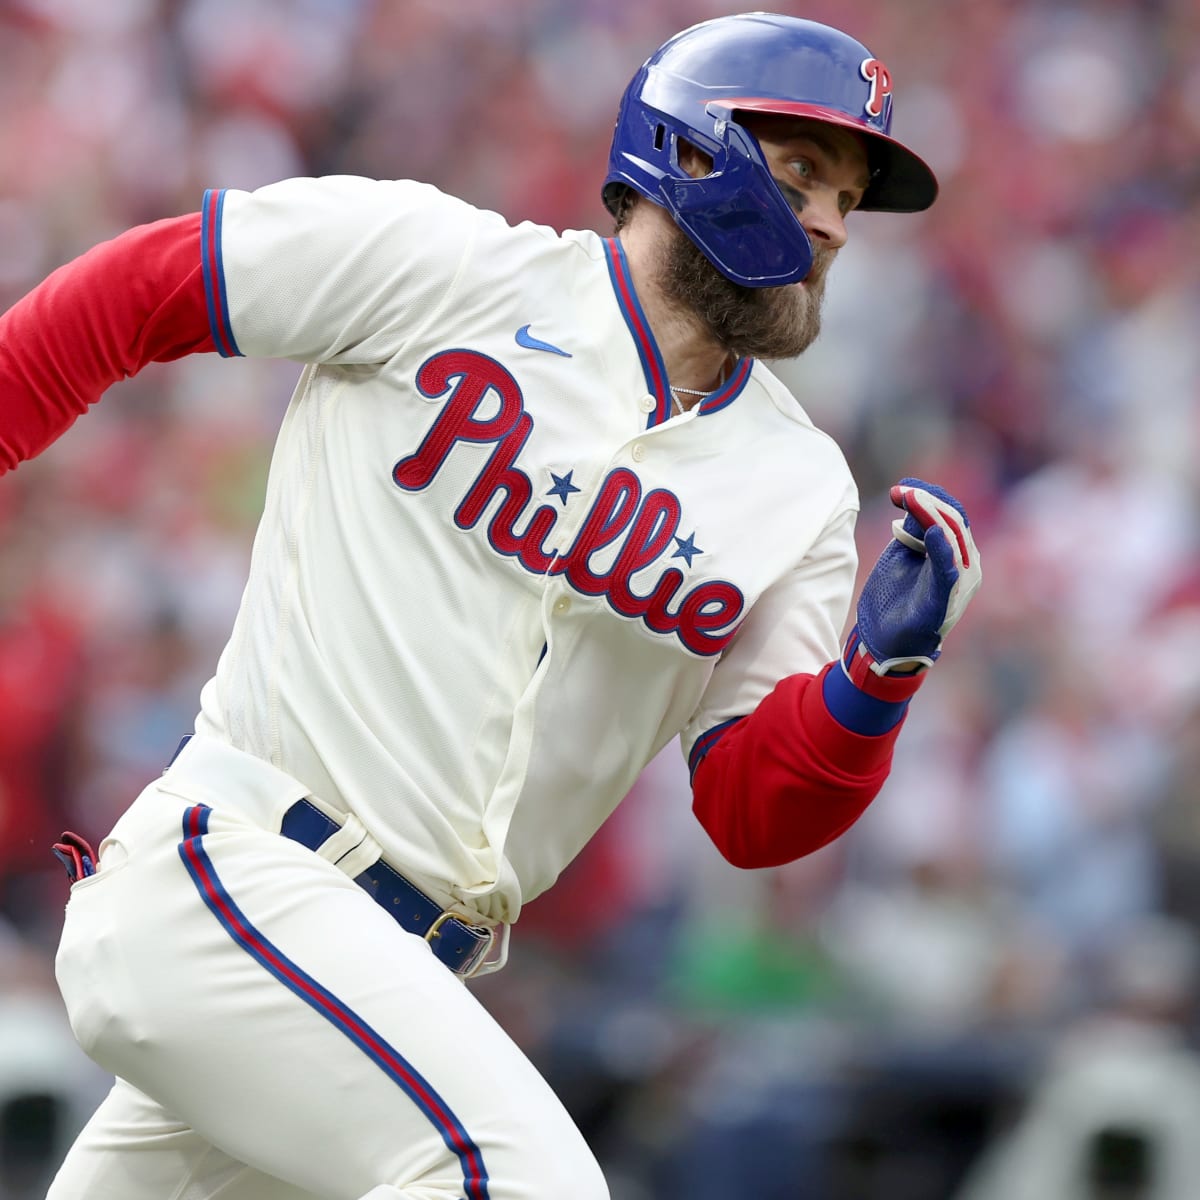 Ava's Angle: The changes that propelled the Phillies to the World Series